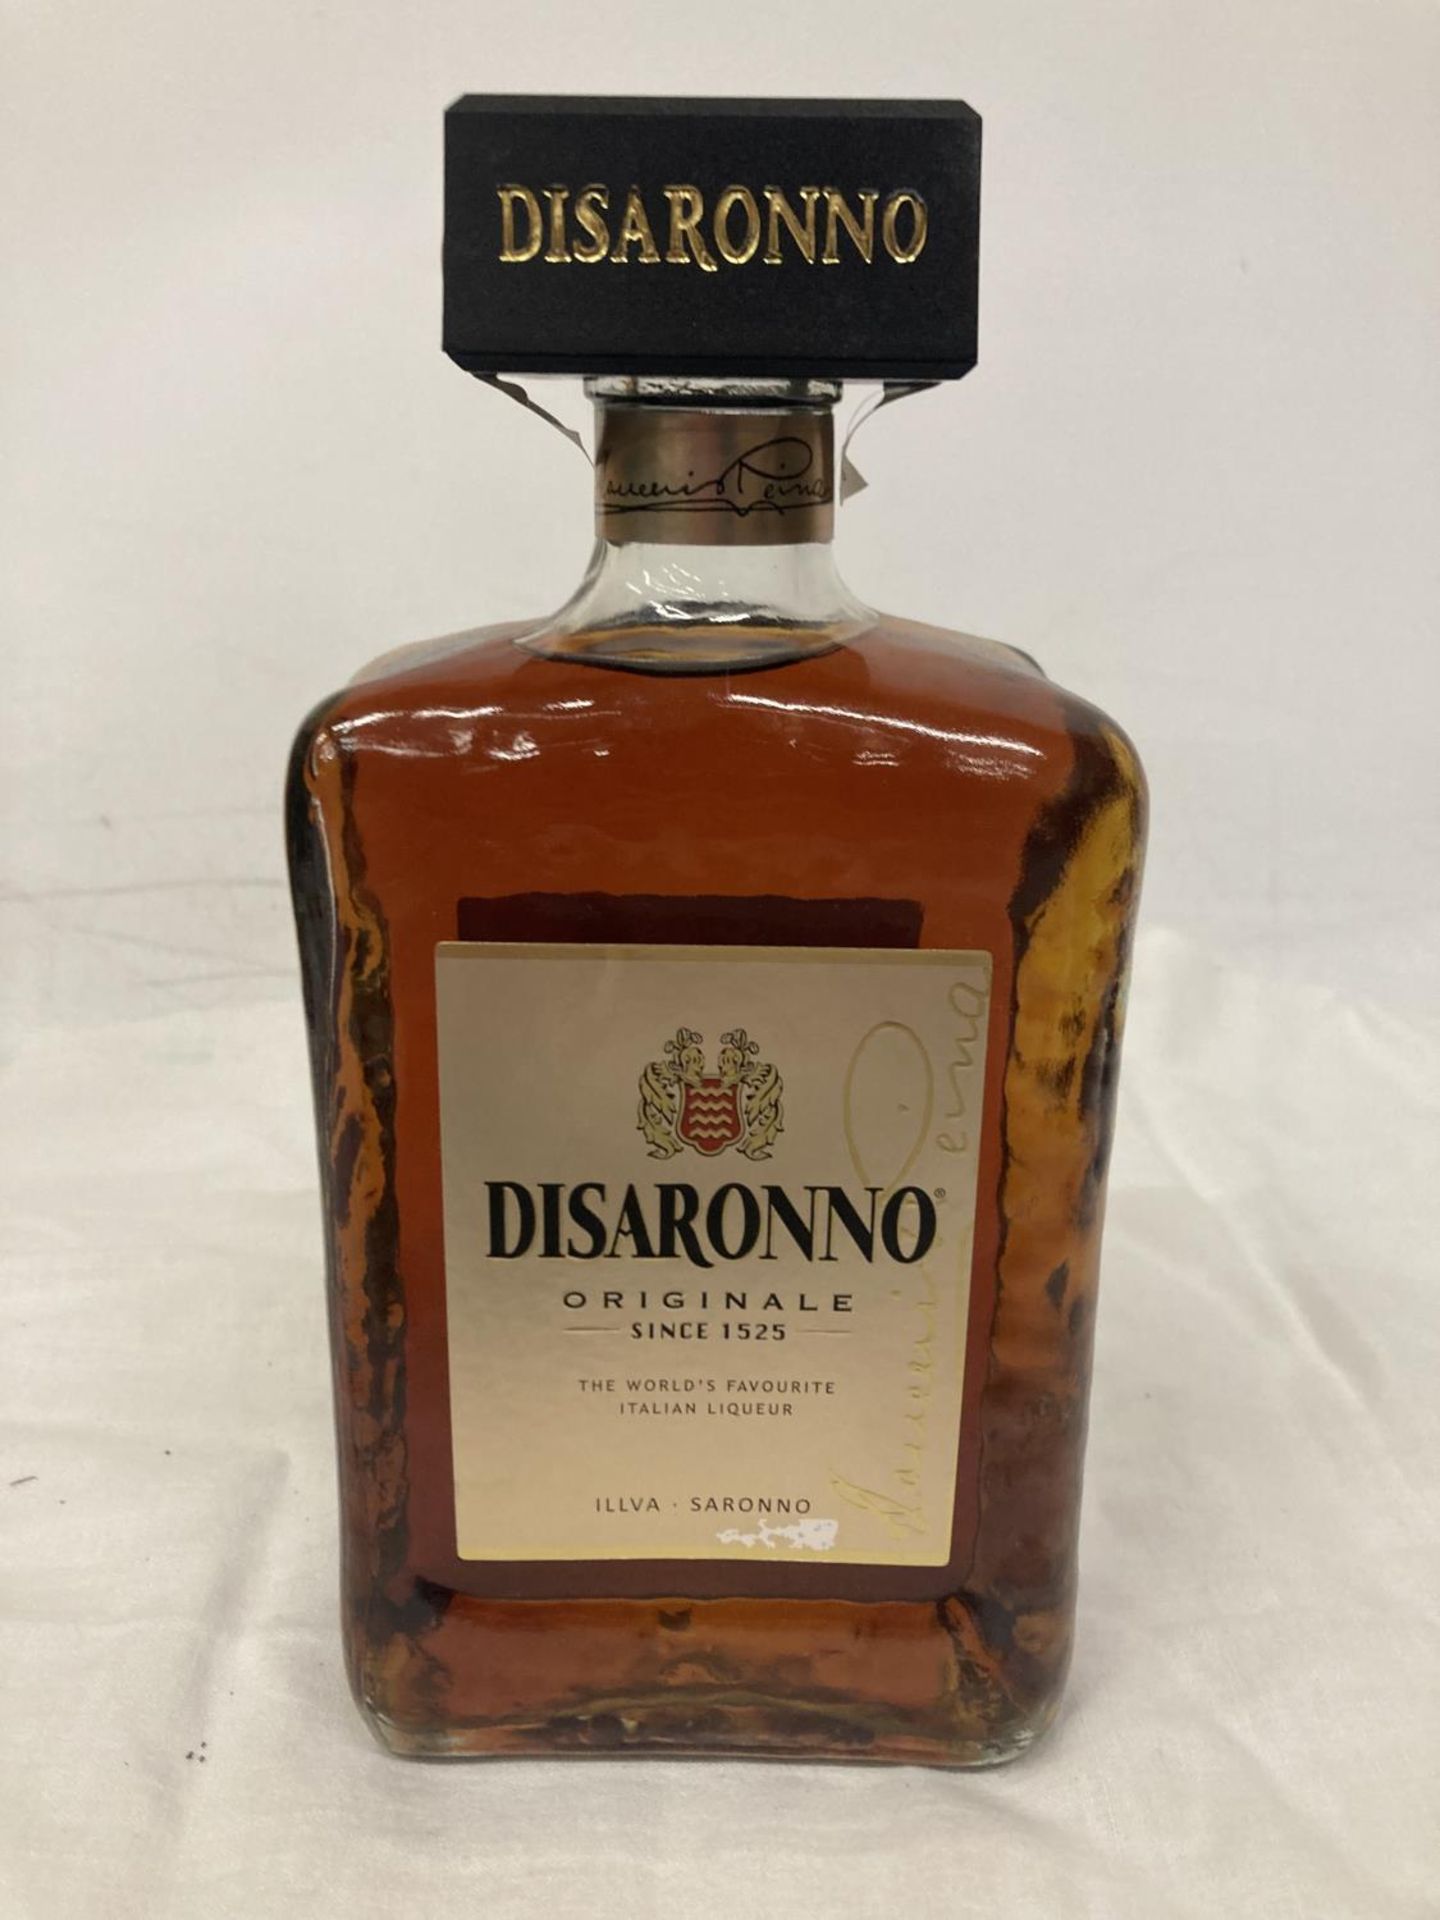 A 700ML BOTTLE OF DISARONNO